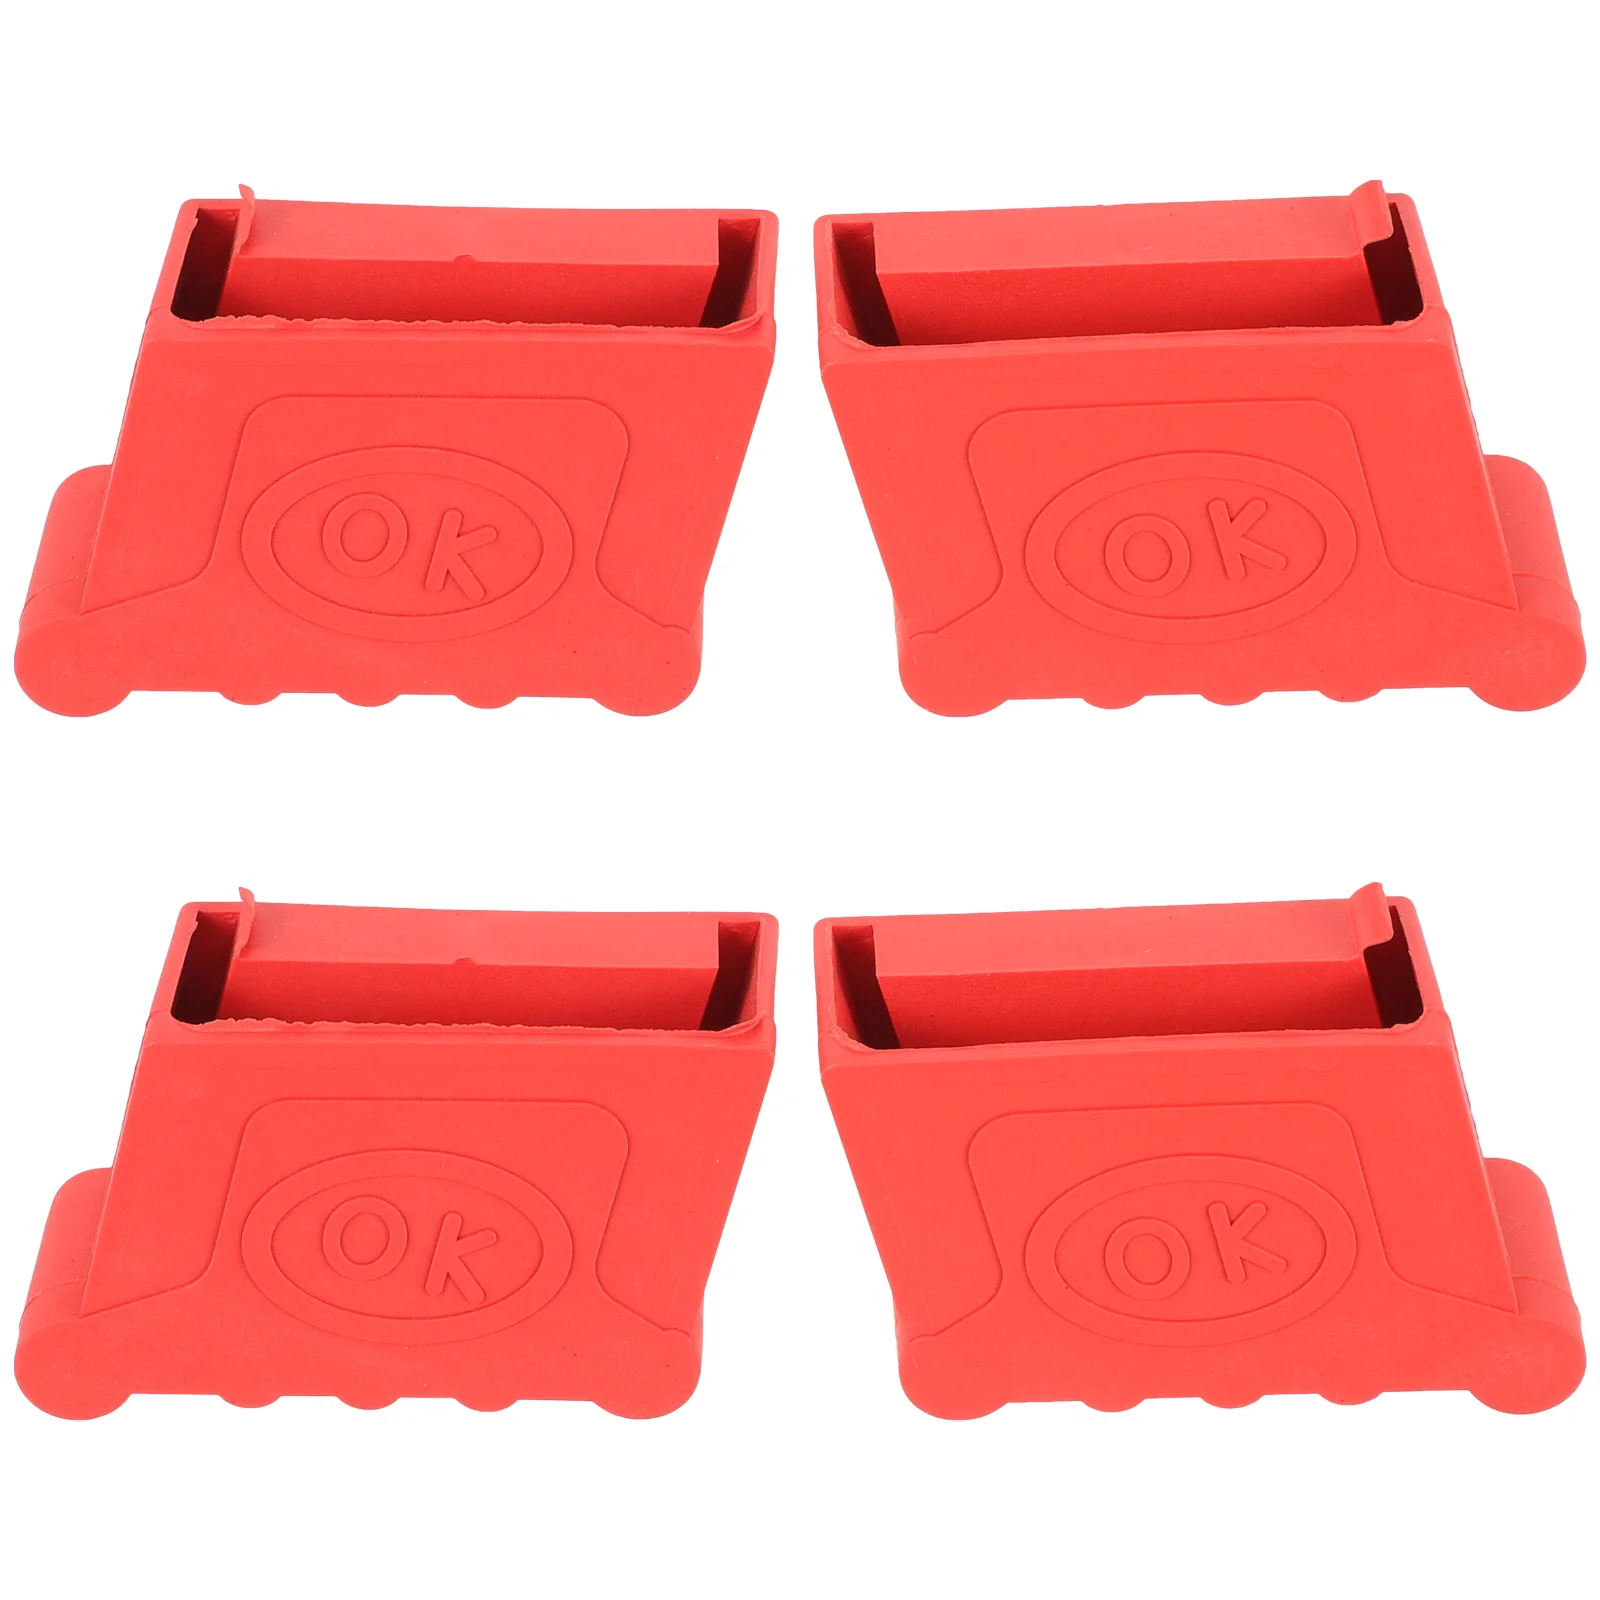 

4 pcs Insulation Antiskid Convenient Replacement Household Ladder Cover Rubber Ladder Feet Covers